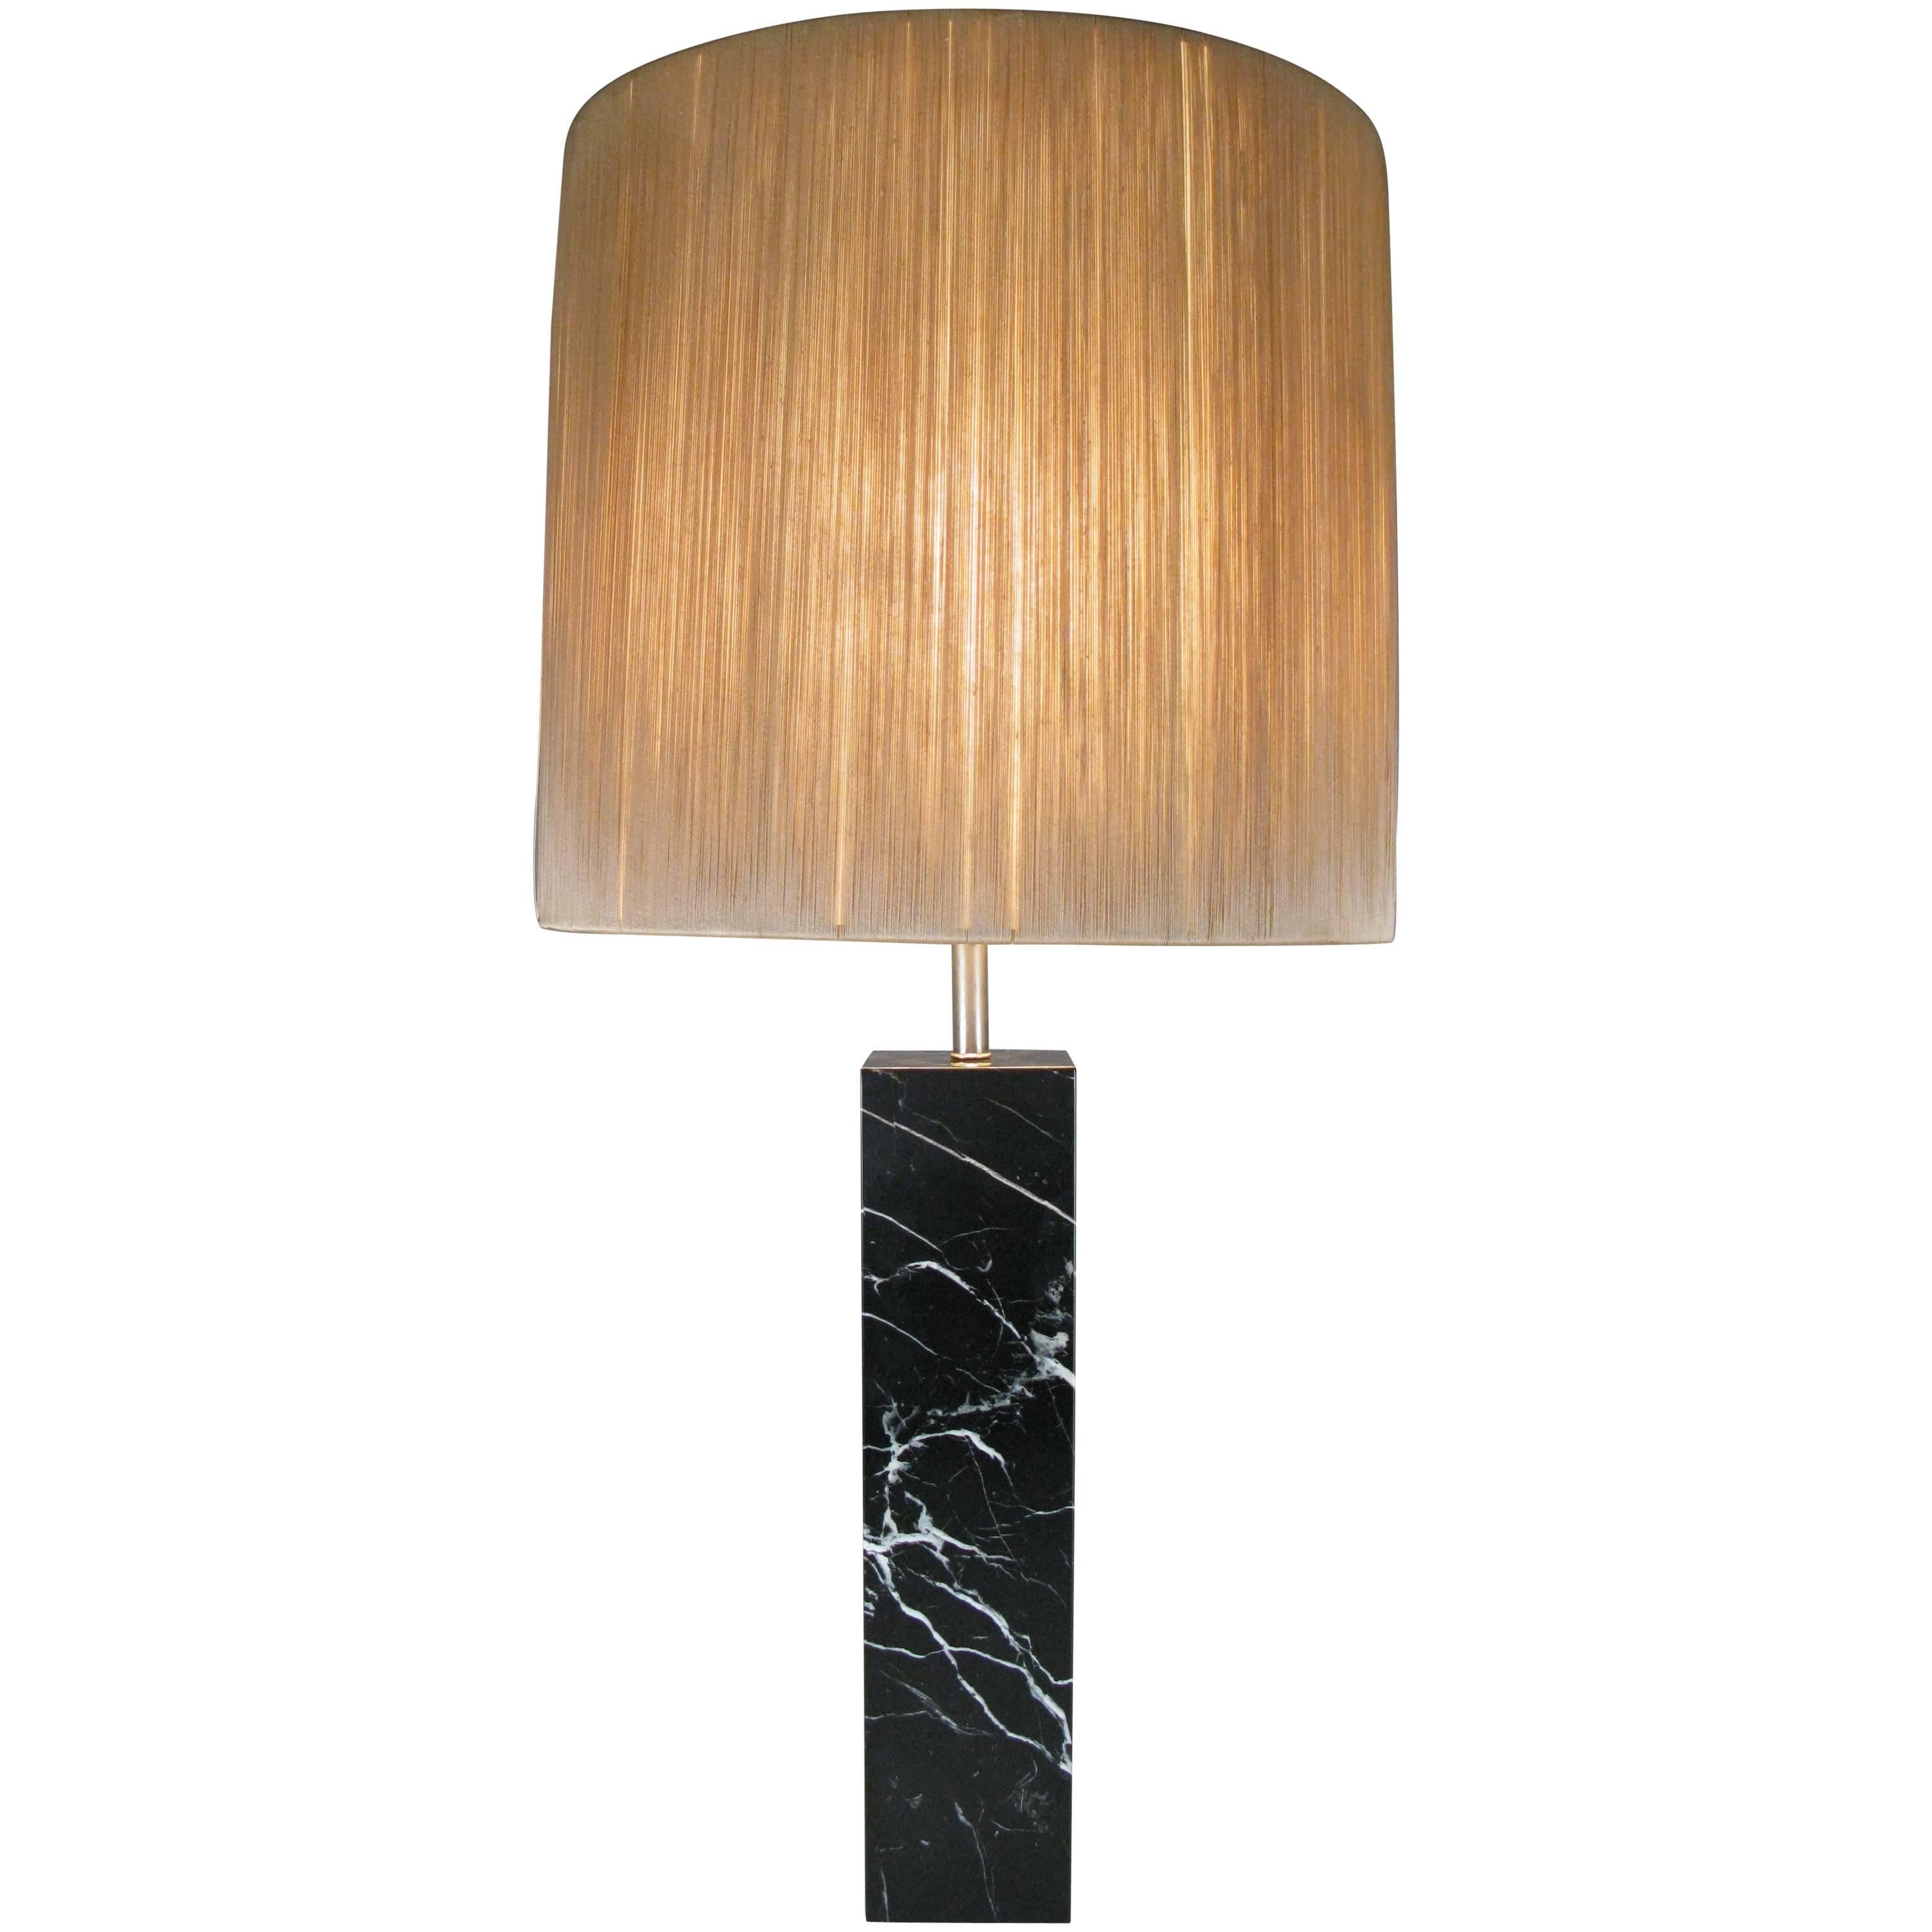 Classic 1950s Black Marble Table Lamp